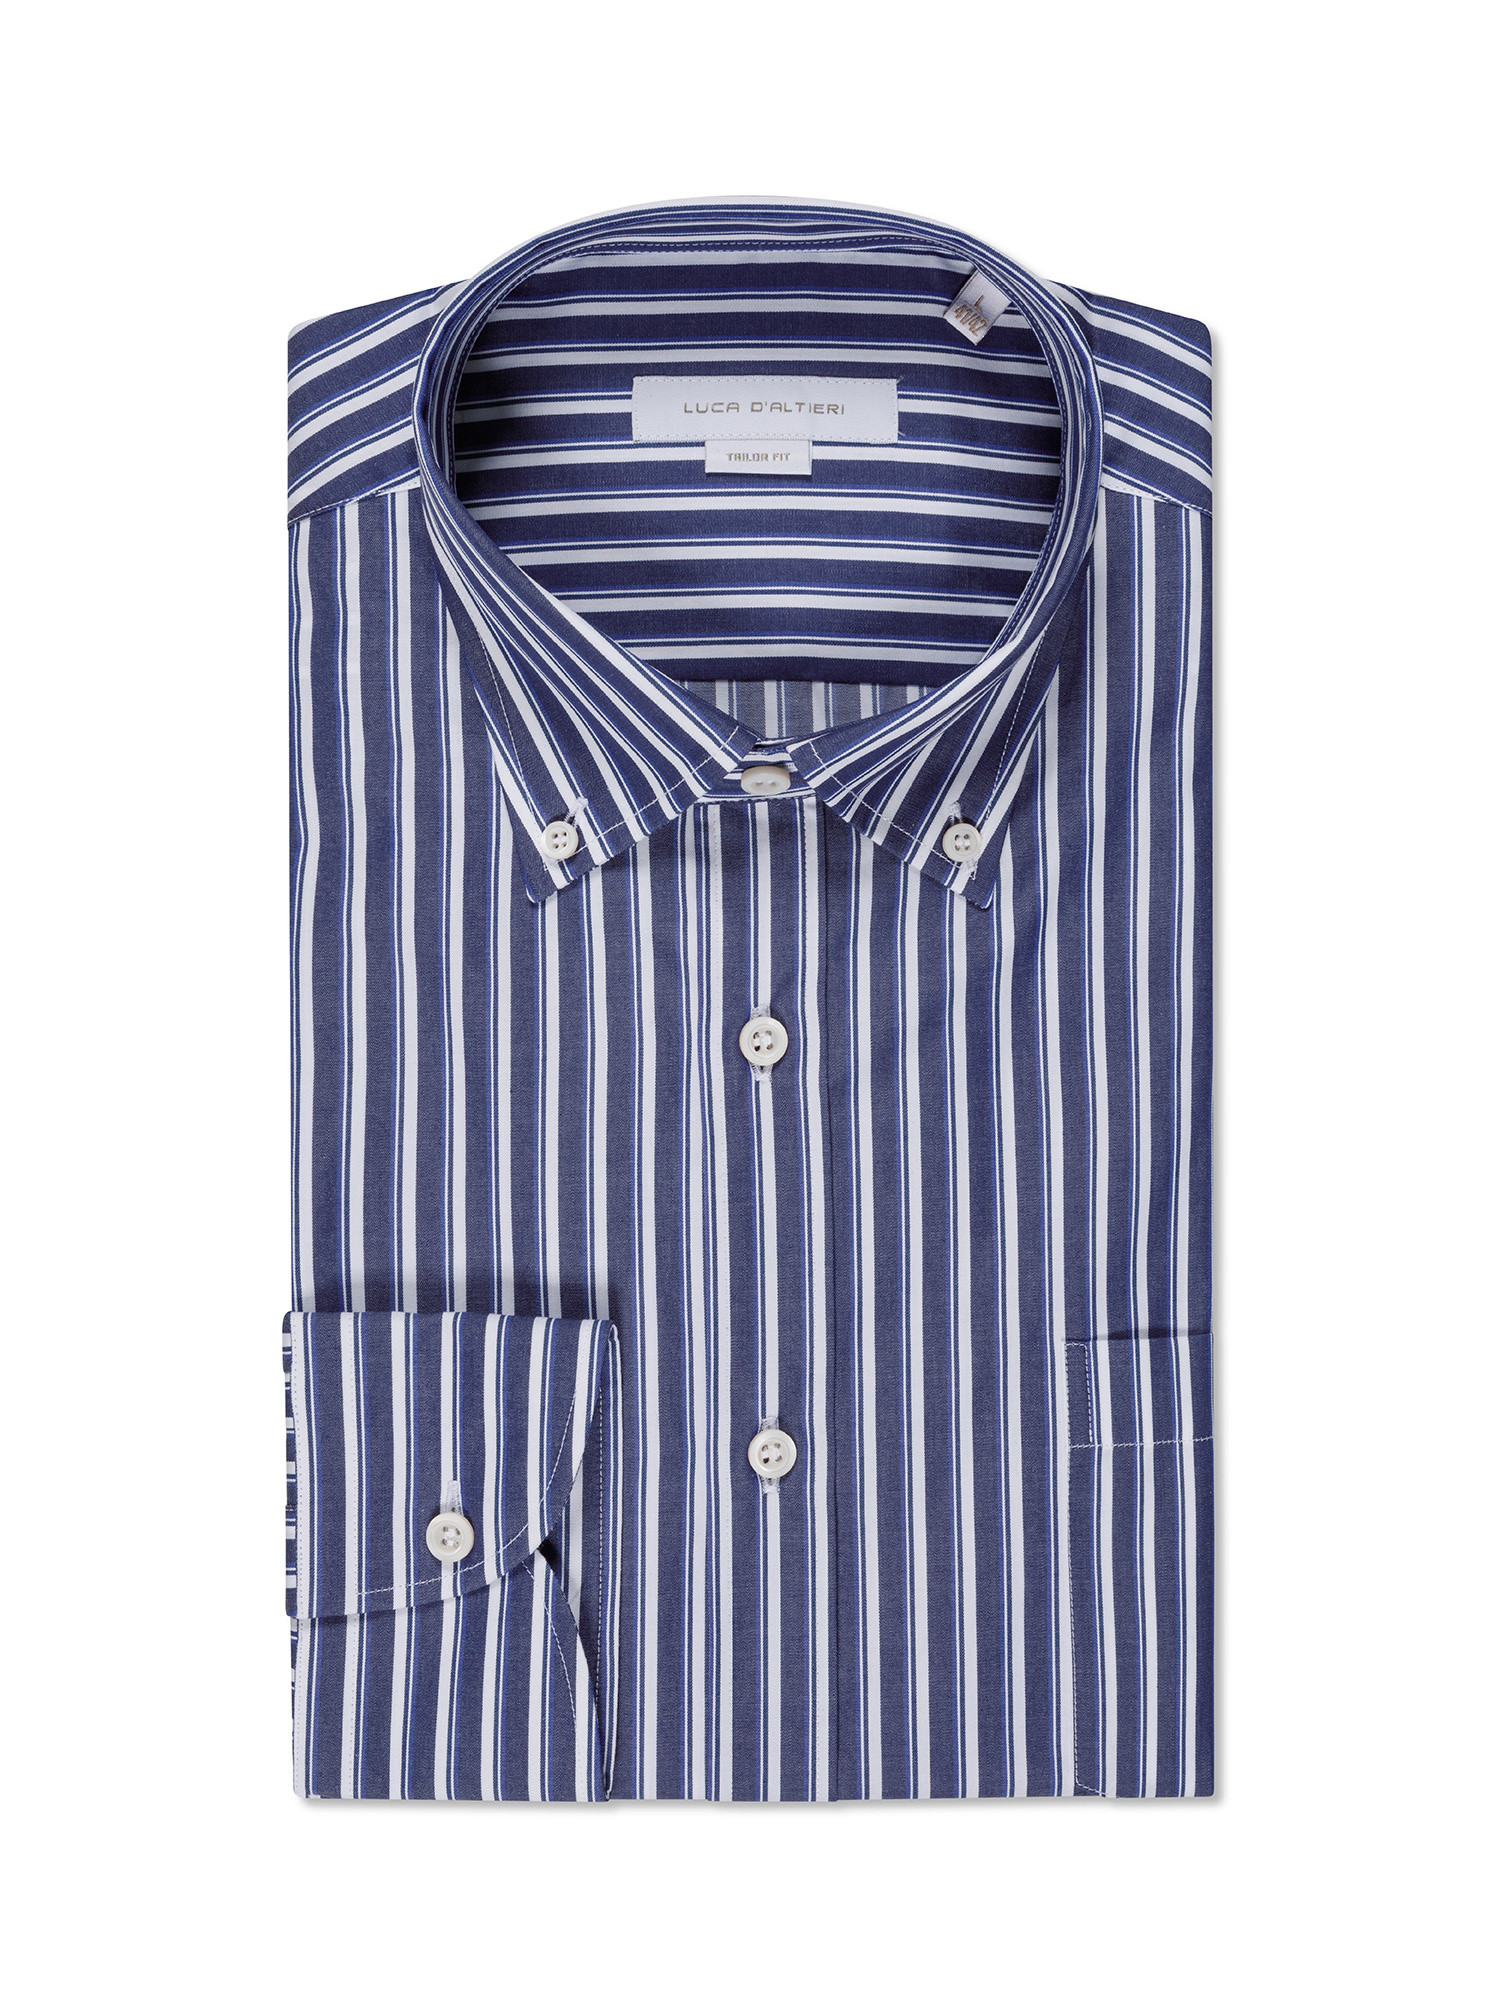 Luca D'Altieri - Tailor fit striped shirt in pure cotton, Blue, large image number 0